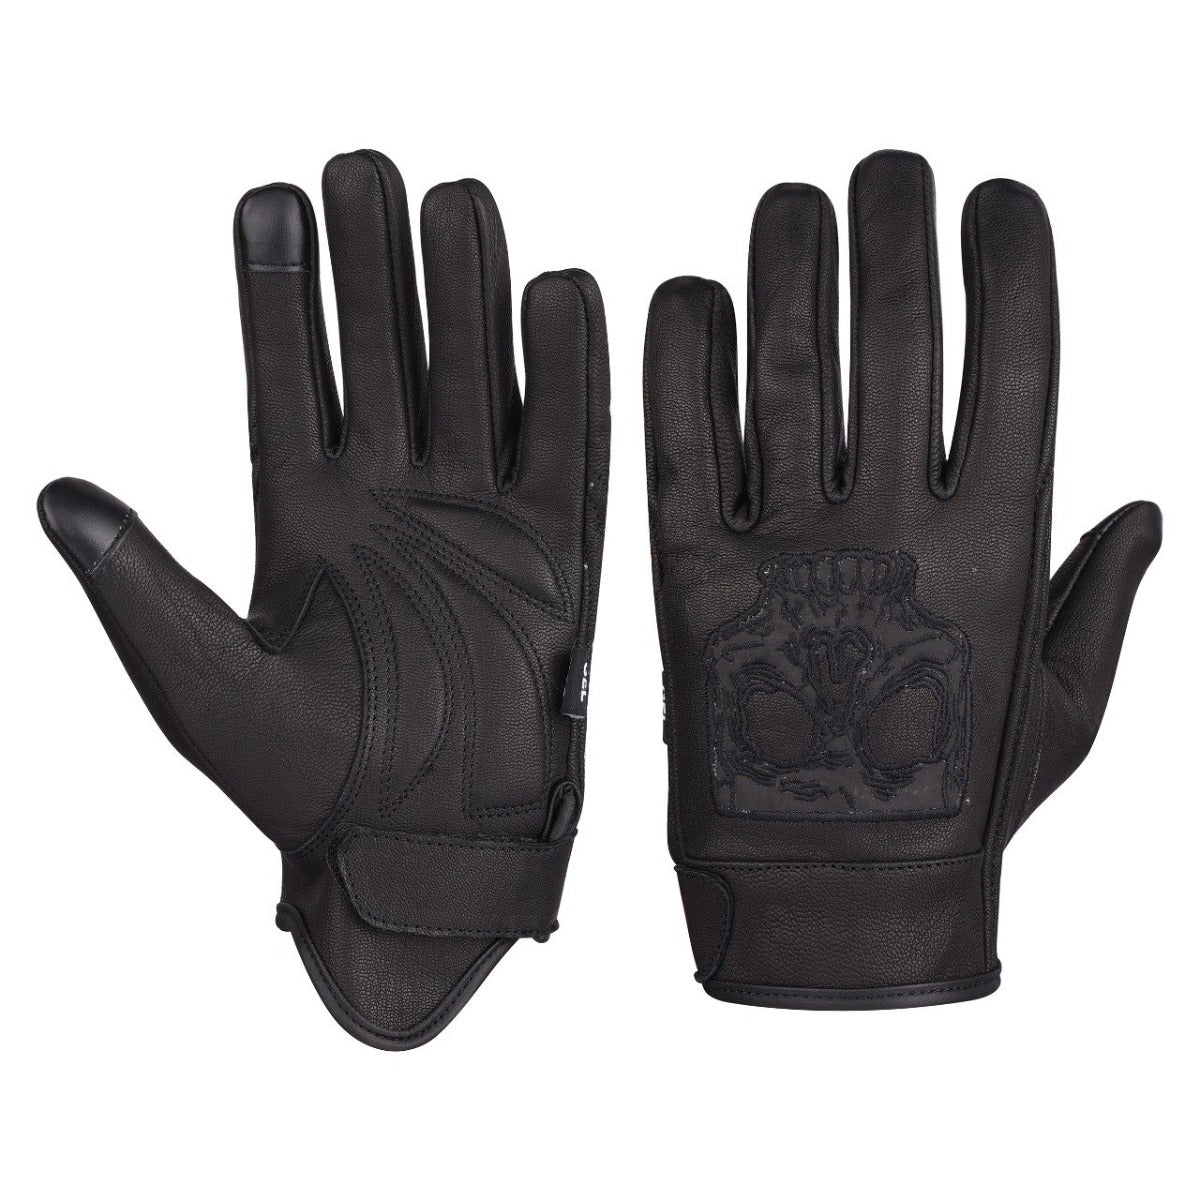 Vance Gel Palm Riding Leather Gloves with Skull